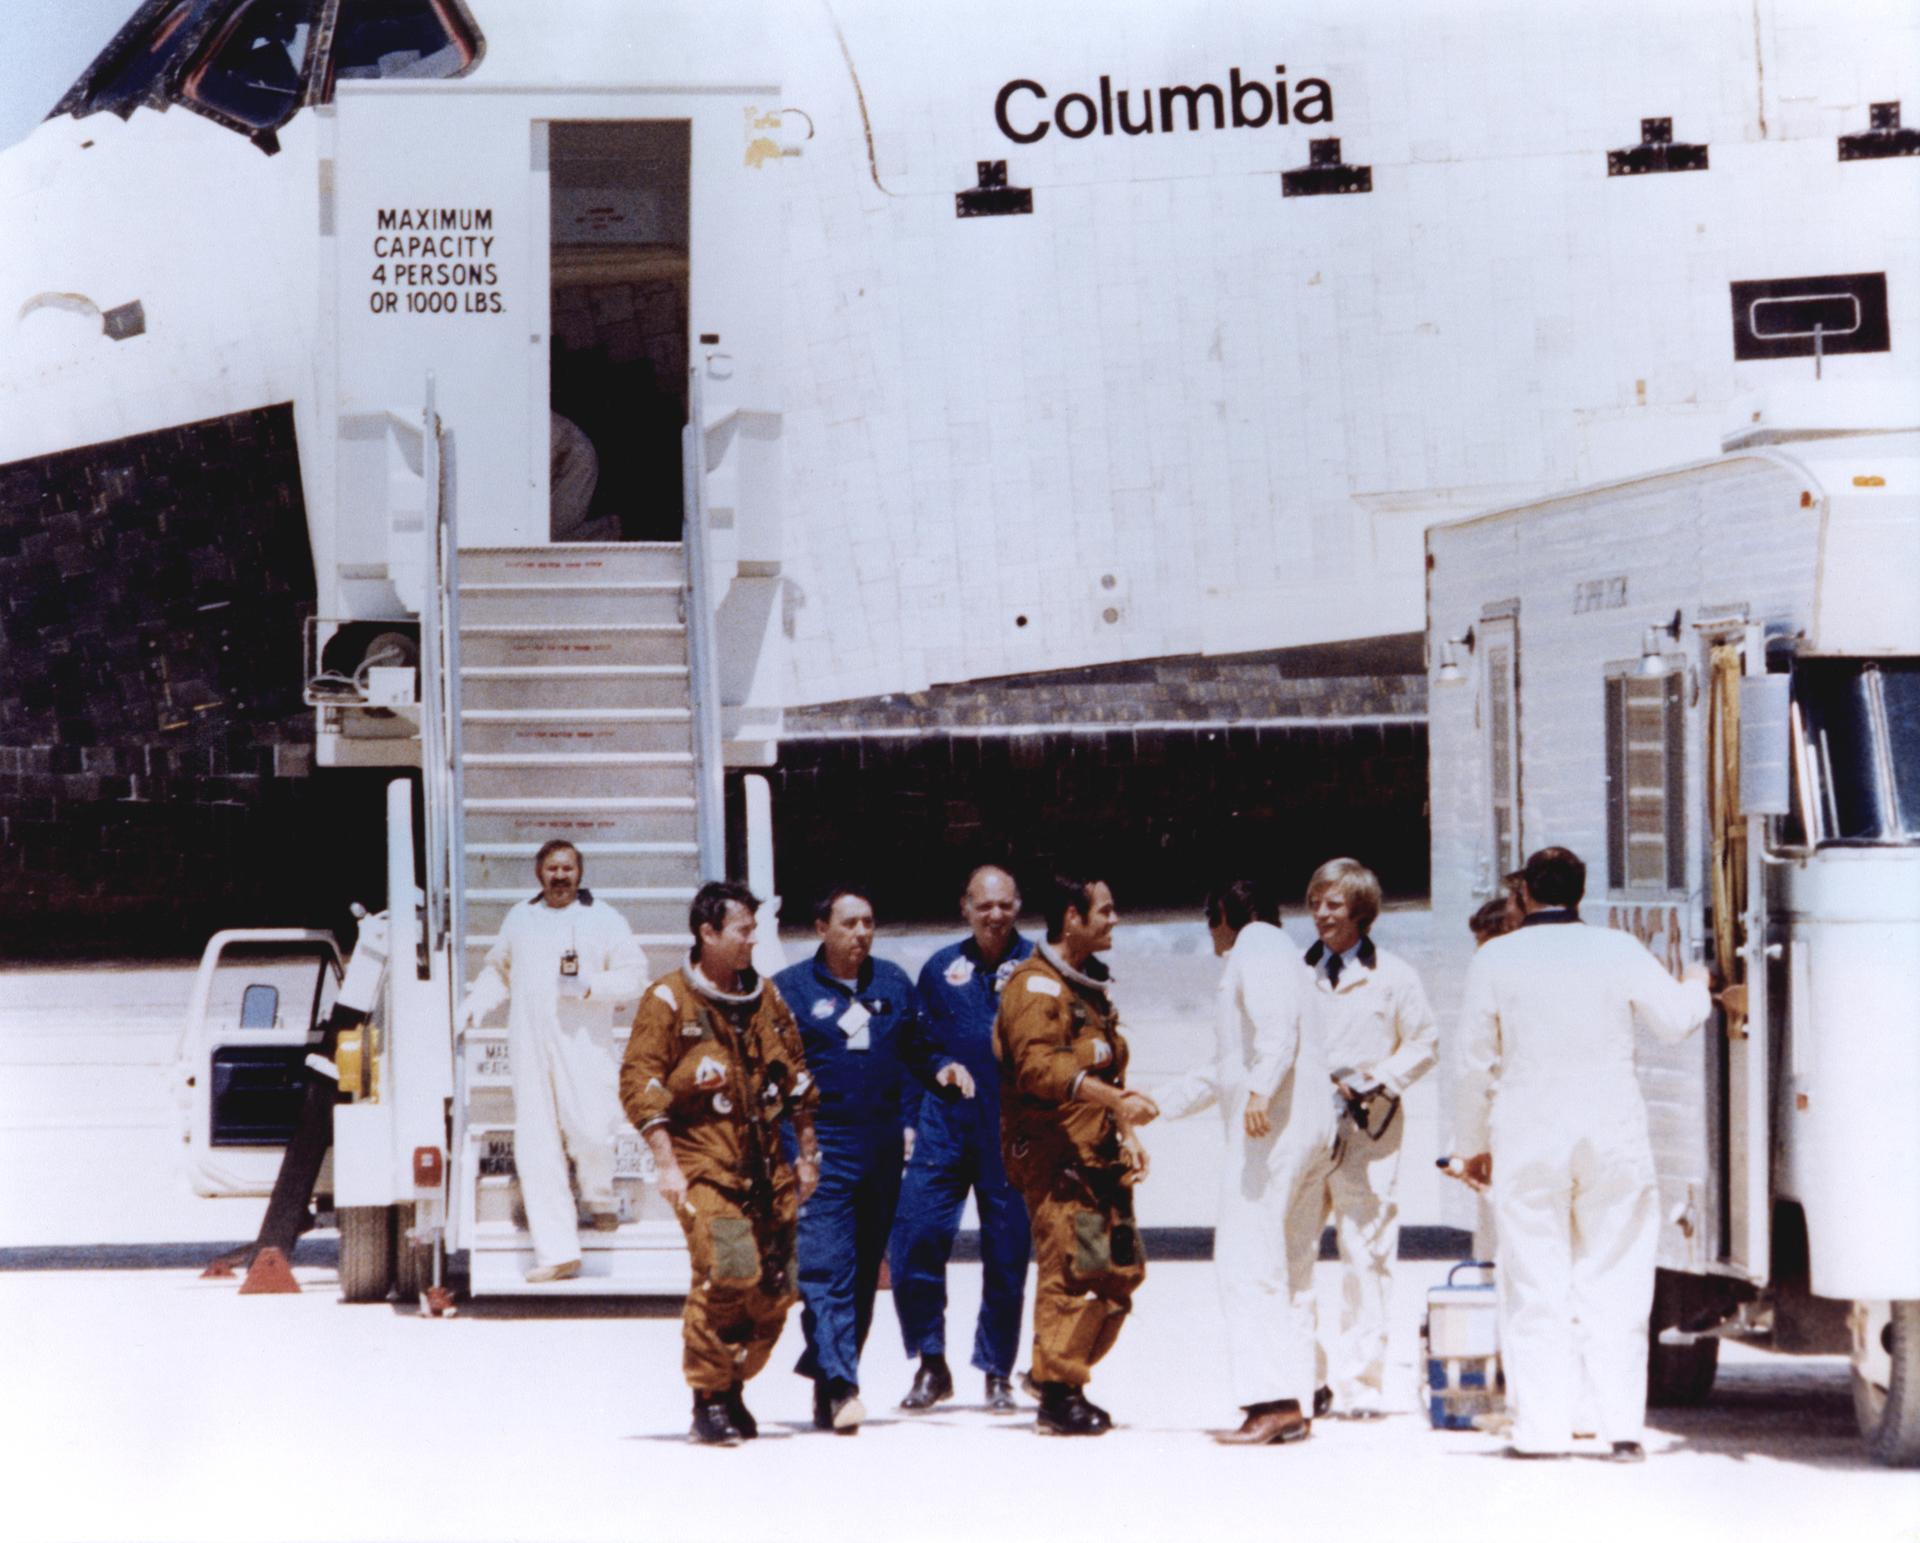 NASA Space Shuttle astronauts John Young and Robert Crippen (in tan space suits) are greeted by members of the ground crew after